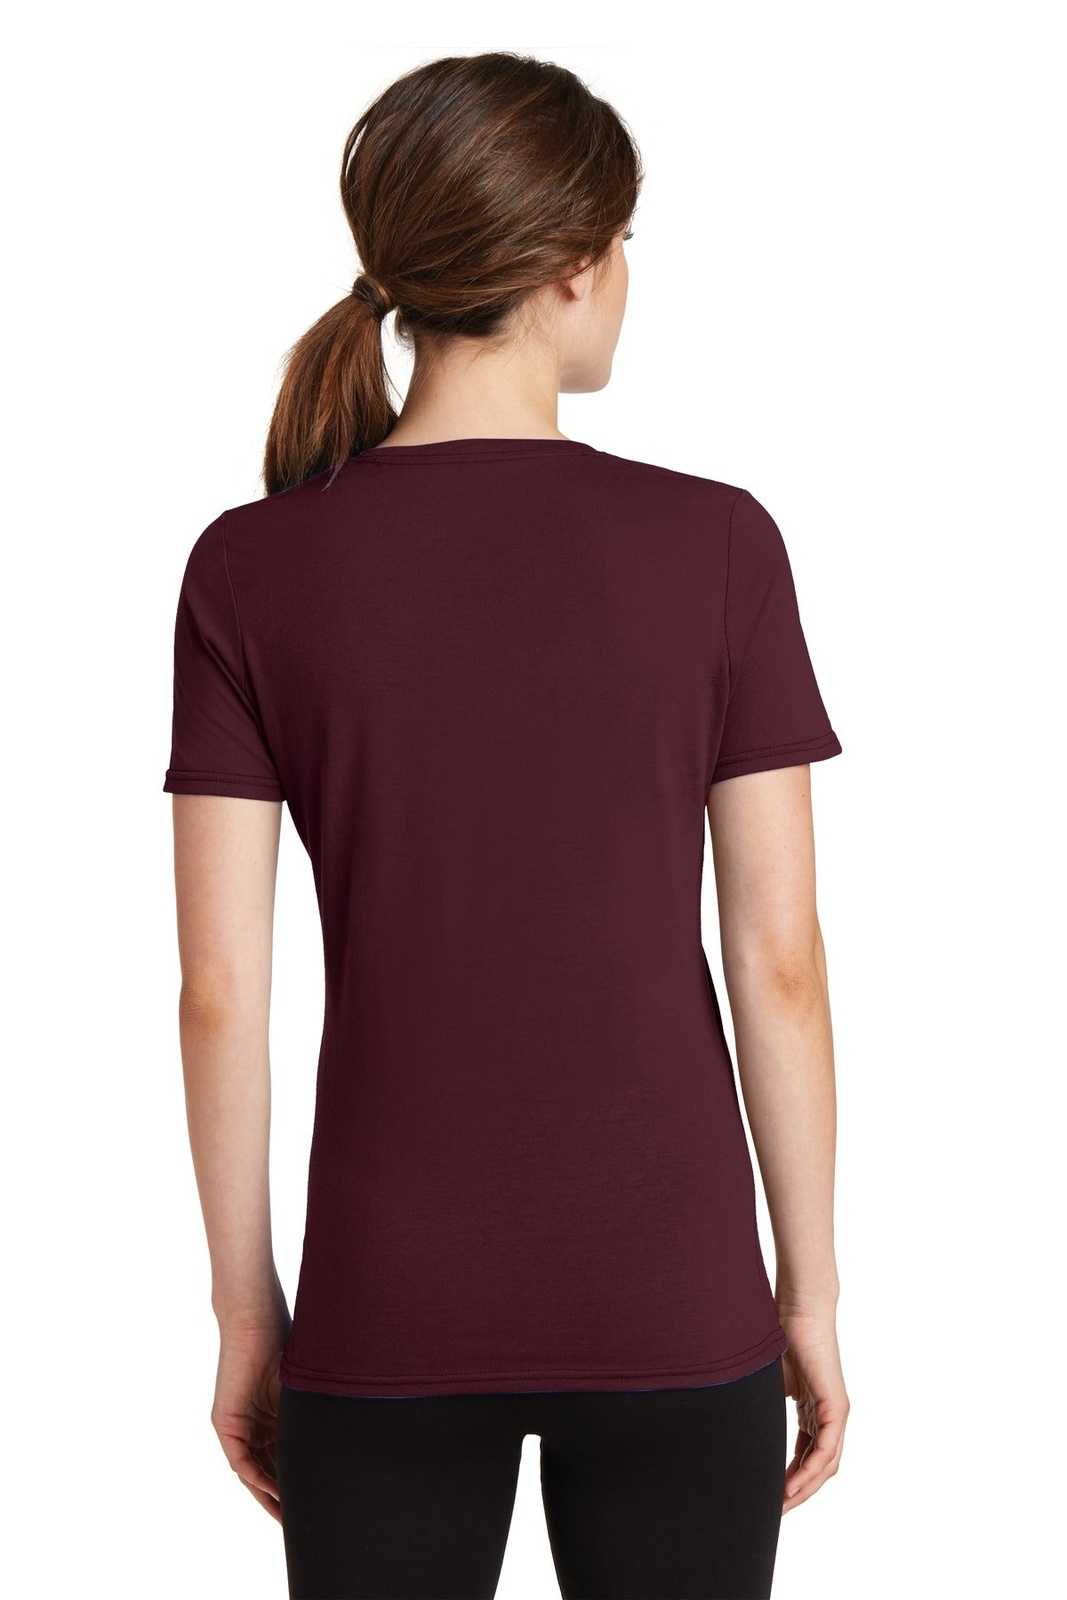 Port &amp; Company LPC381V Ladies Performance Blend V-Neck Tee - Athletic Maroon - HIT a Double - 2